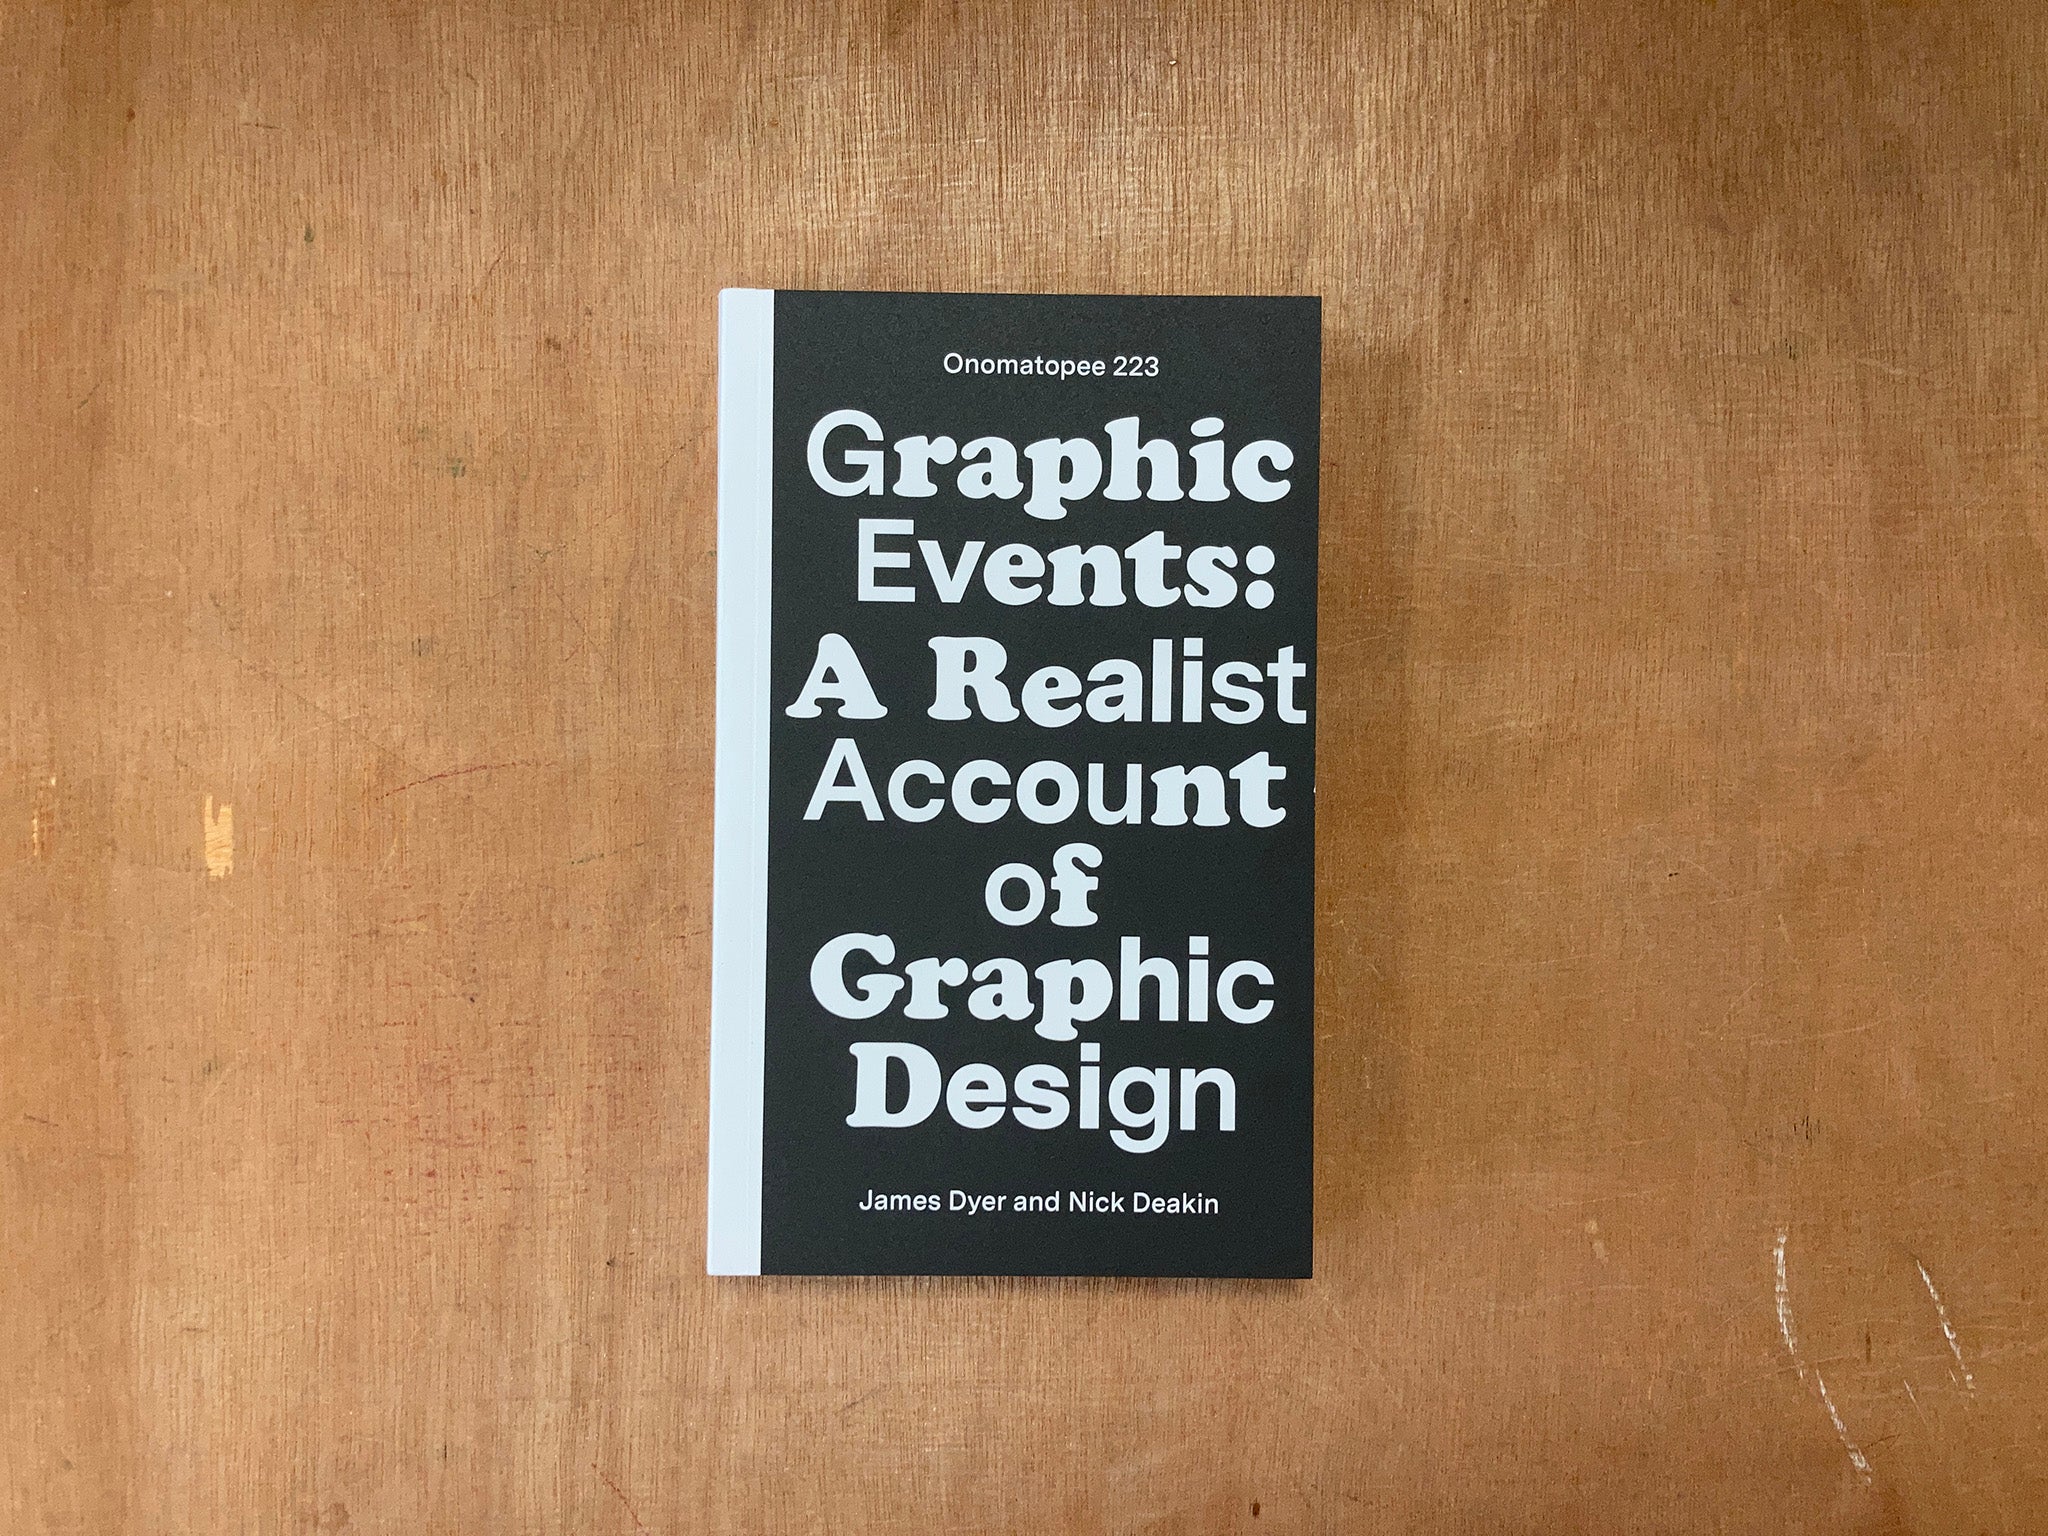 GRAPHIC EVENTS, A REALIST ACCOUNT OF GRAPHIC DESIGN by James Dyer and Nick Deakin